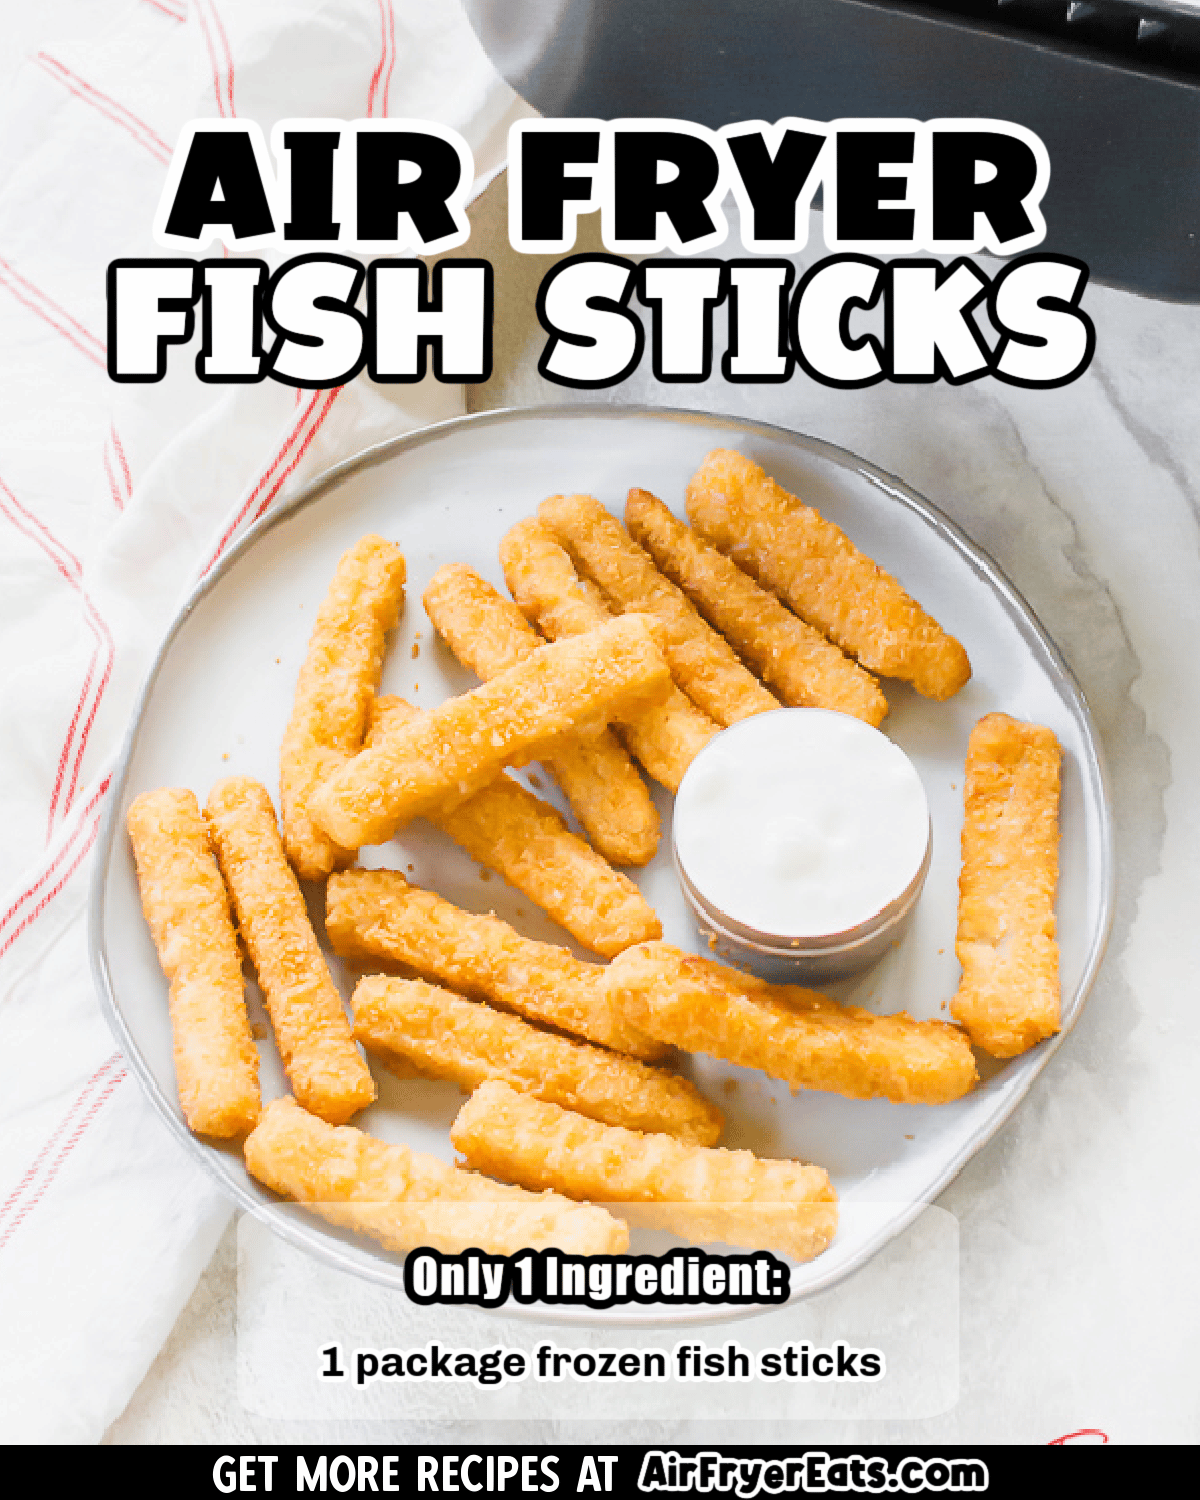 Air Fryer Fish Sticks are a crunchy air fryer food that you are going to love. Cooking frozen fish sticks in the air fryer couldn't be any easier! #airfryerfish #airfryerfishsticks #frozenfishsticks via @vegetarianmamma